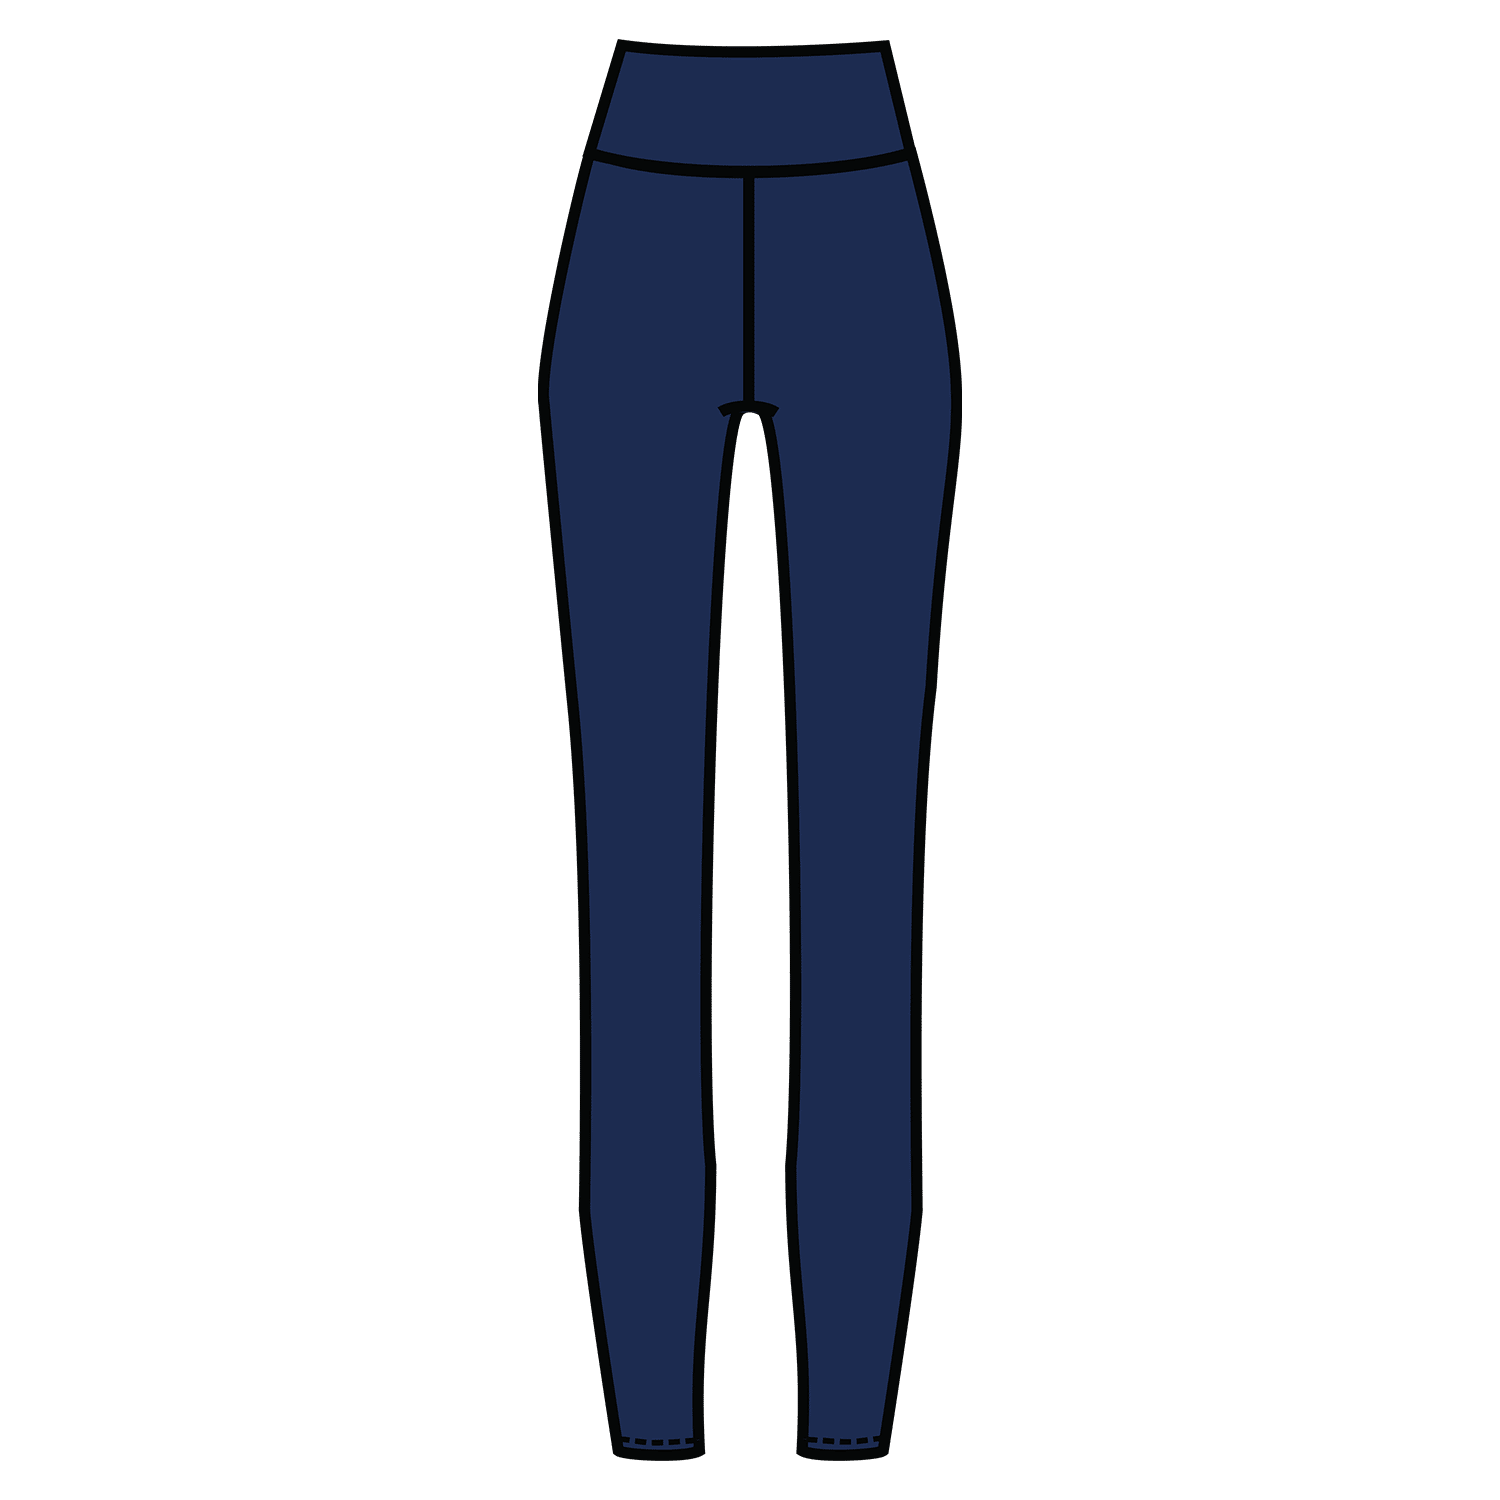 Playmakers, Playmakers 25" Yoga Legging, Women, Navy